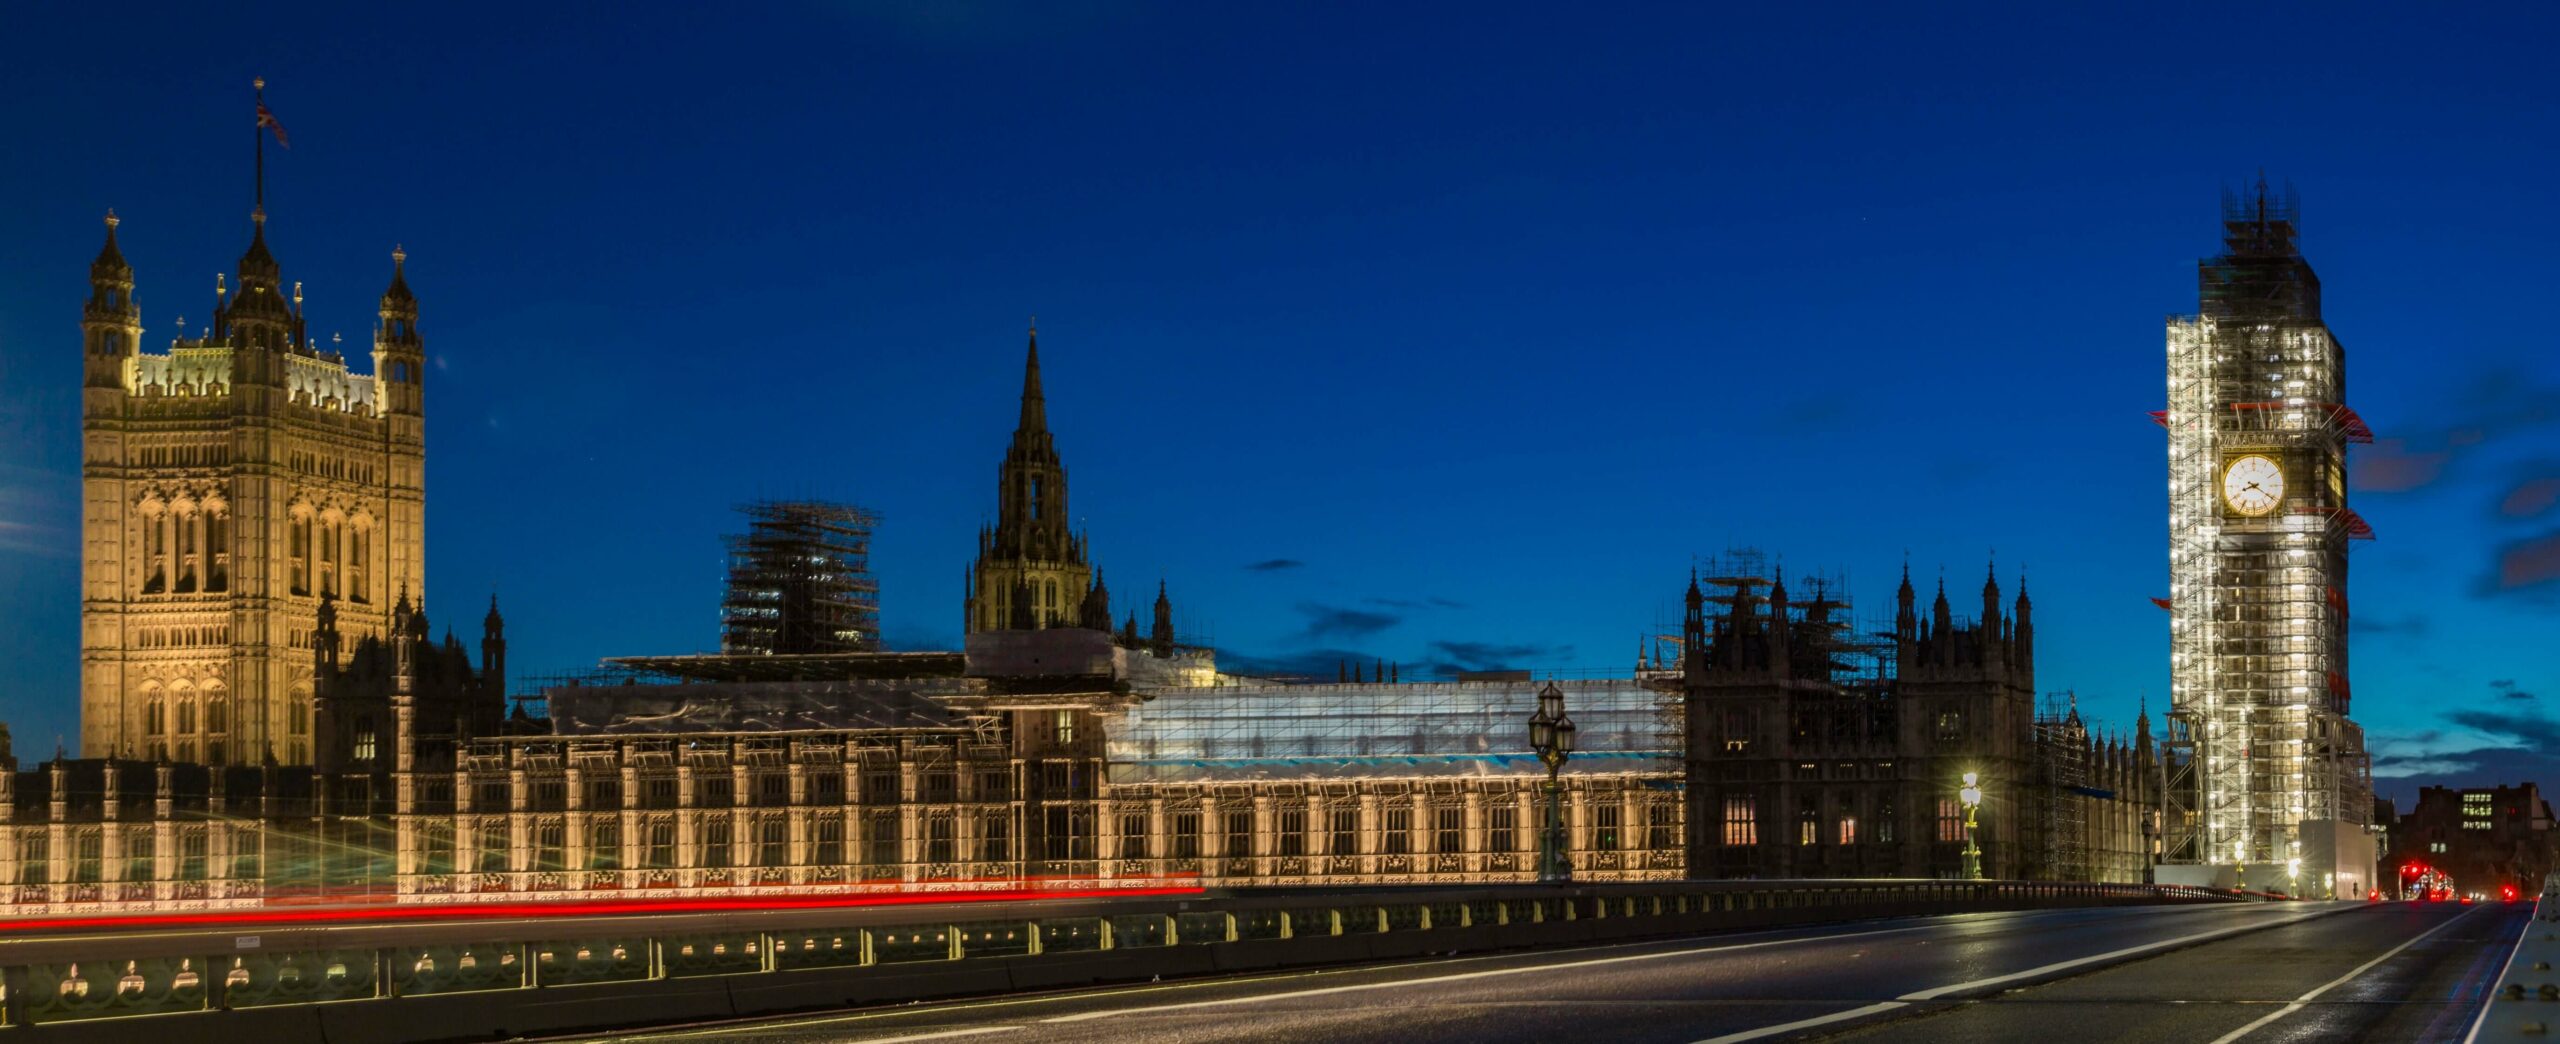 Houses of parliament, housing the UK government